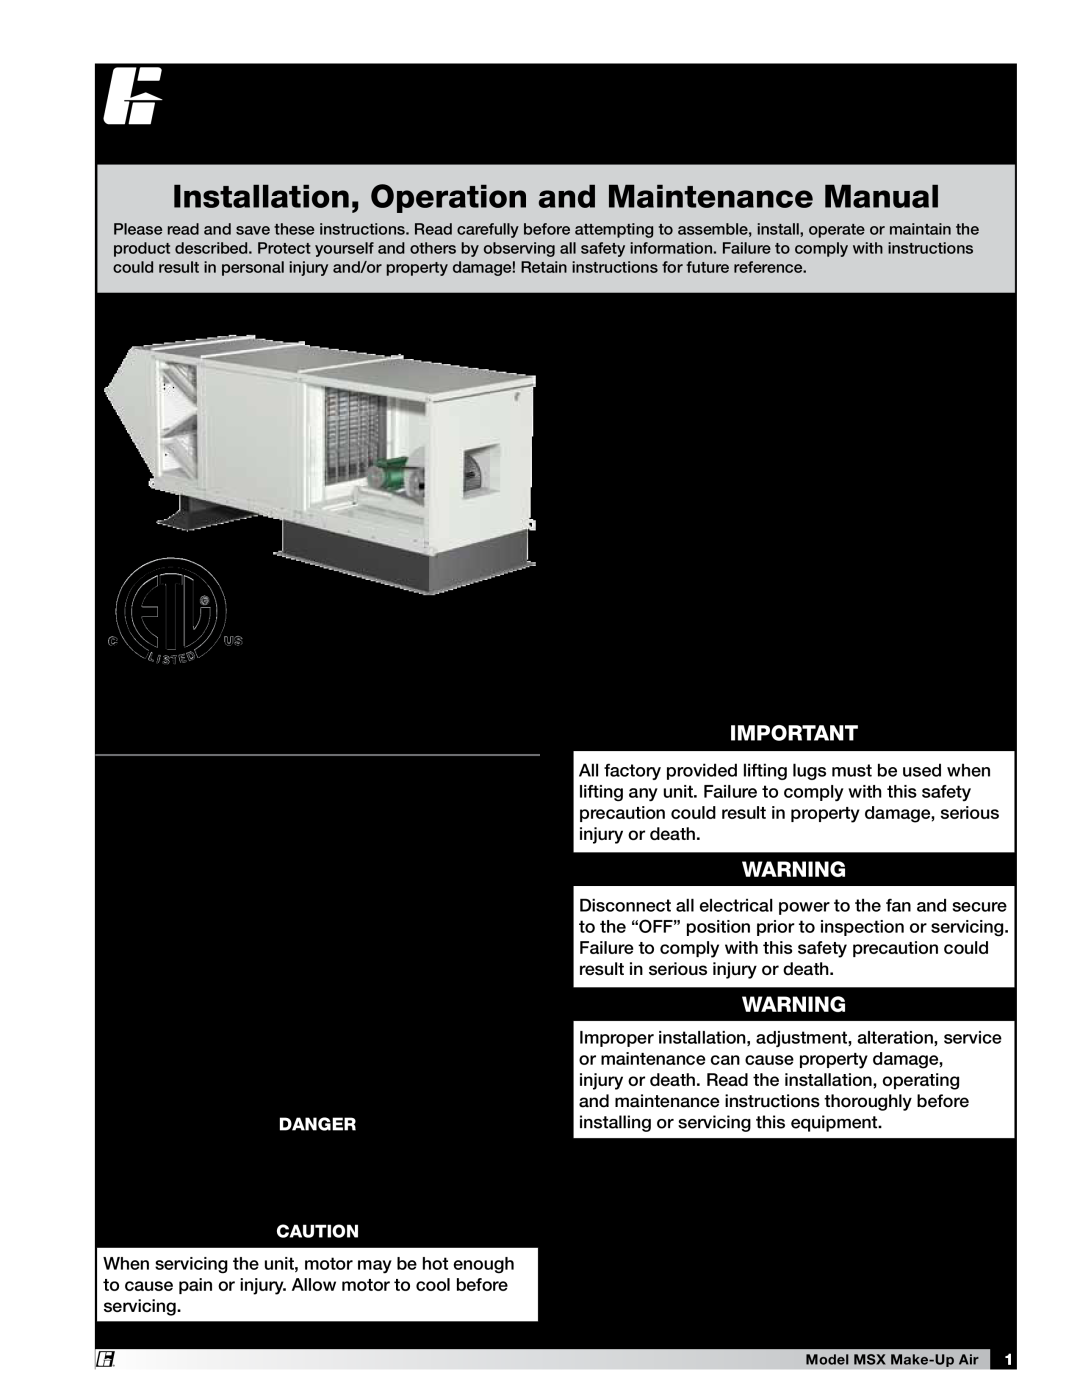 Greenheck Fan 470658 MSX manual General Safety Information, Danger, Installation, Operation and Maintenance Manual 